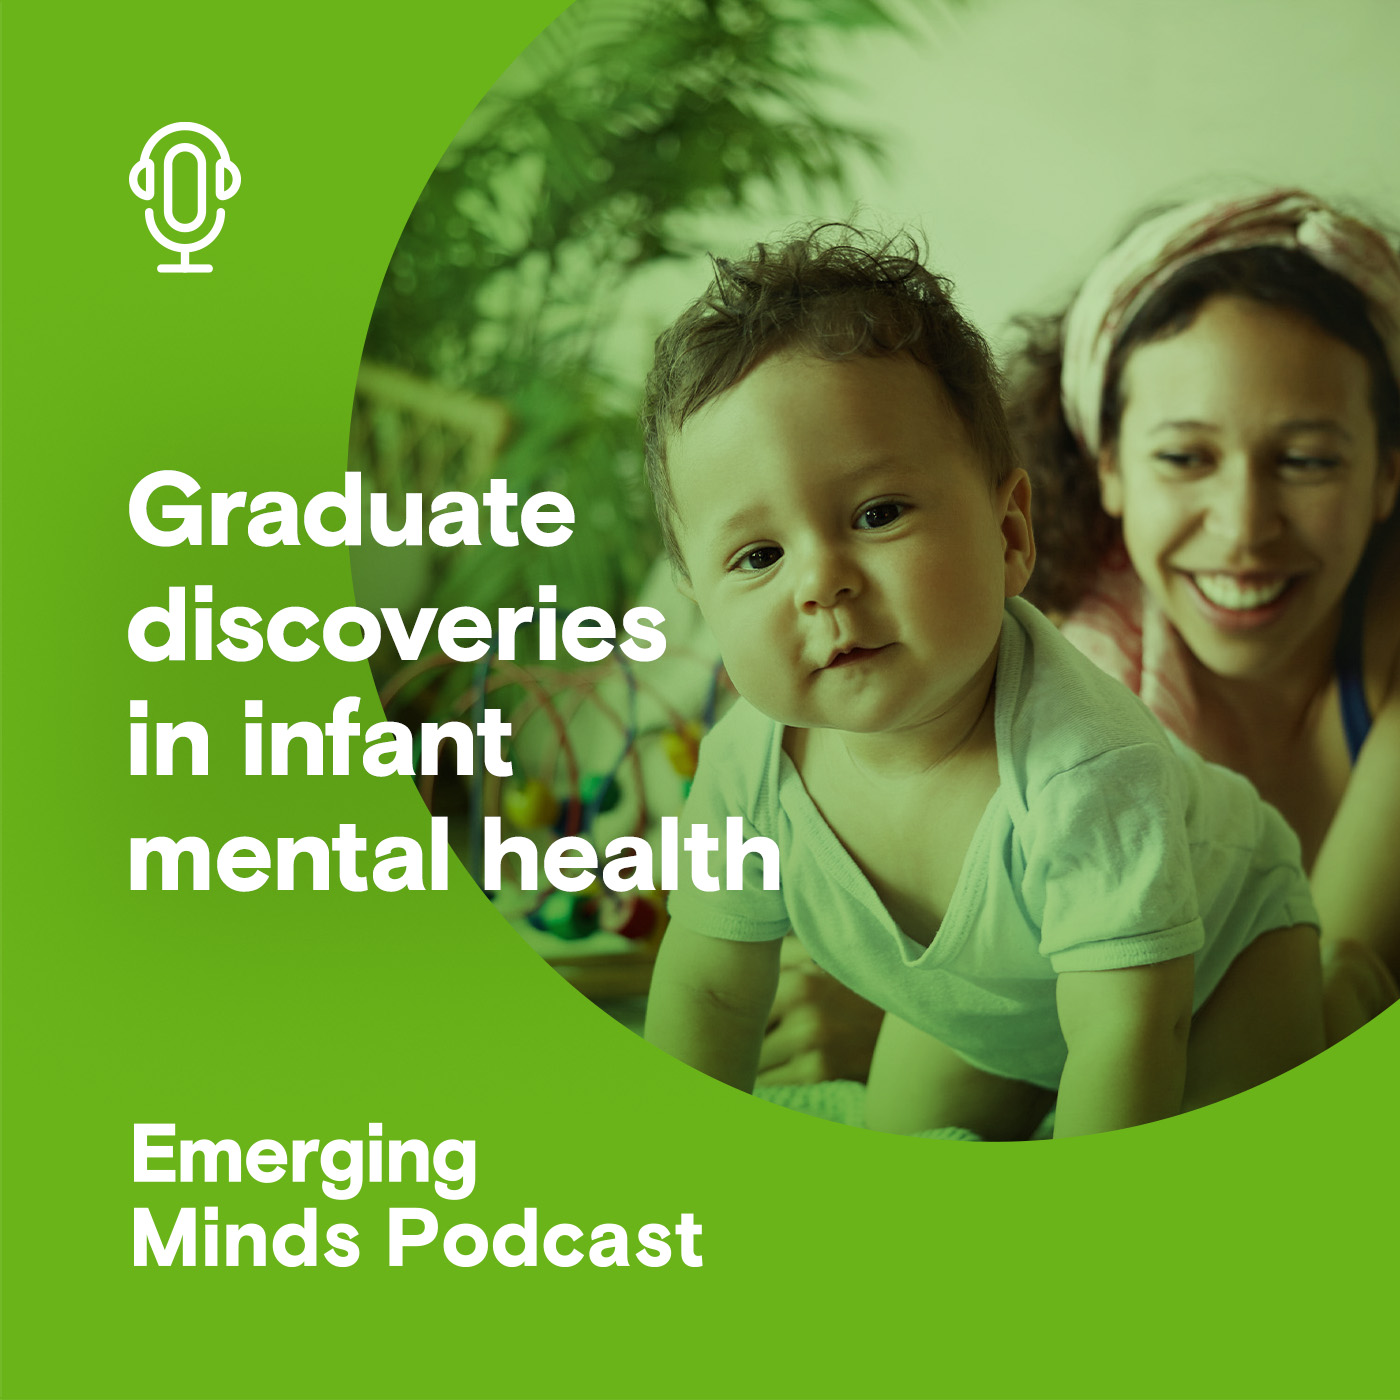 Graduate discoveries in infant mental health